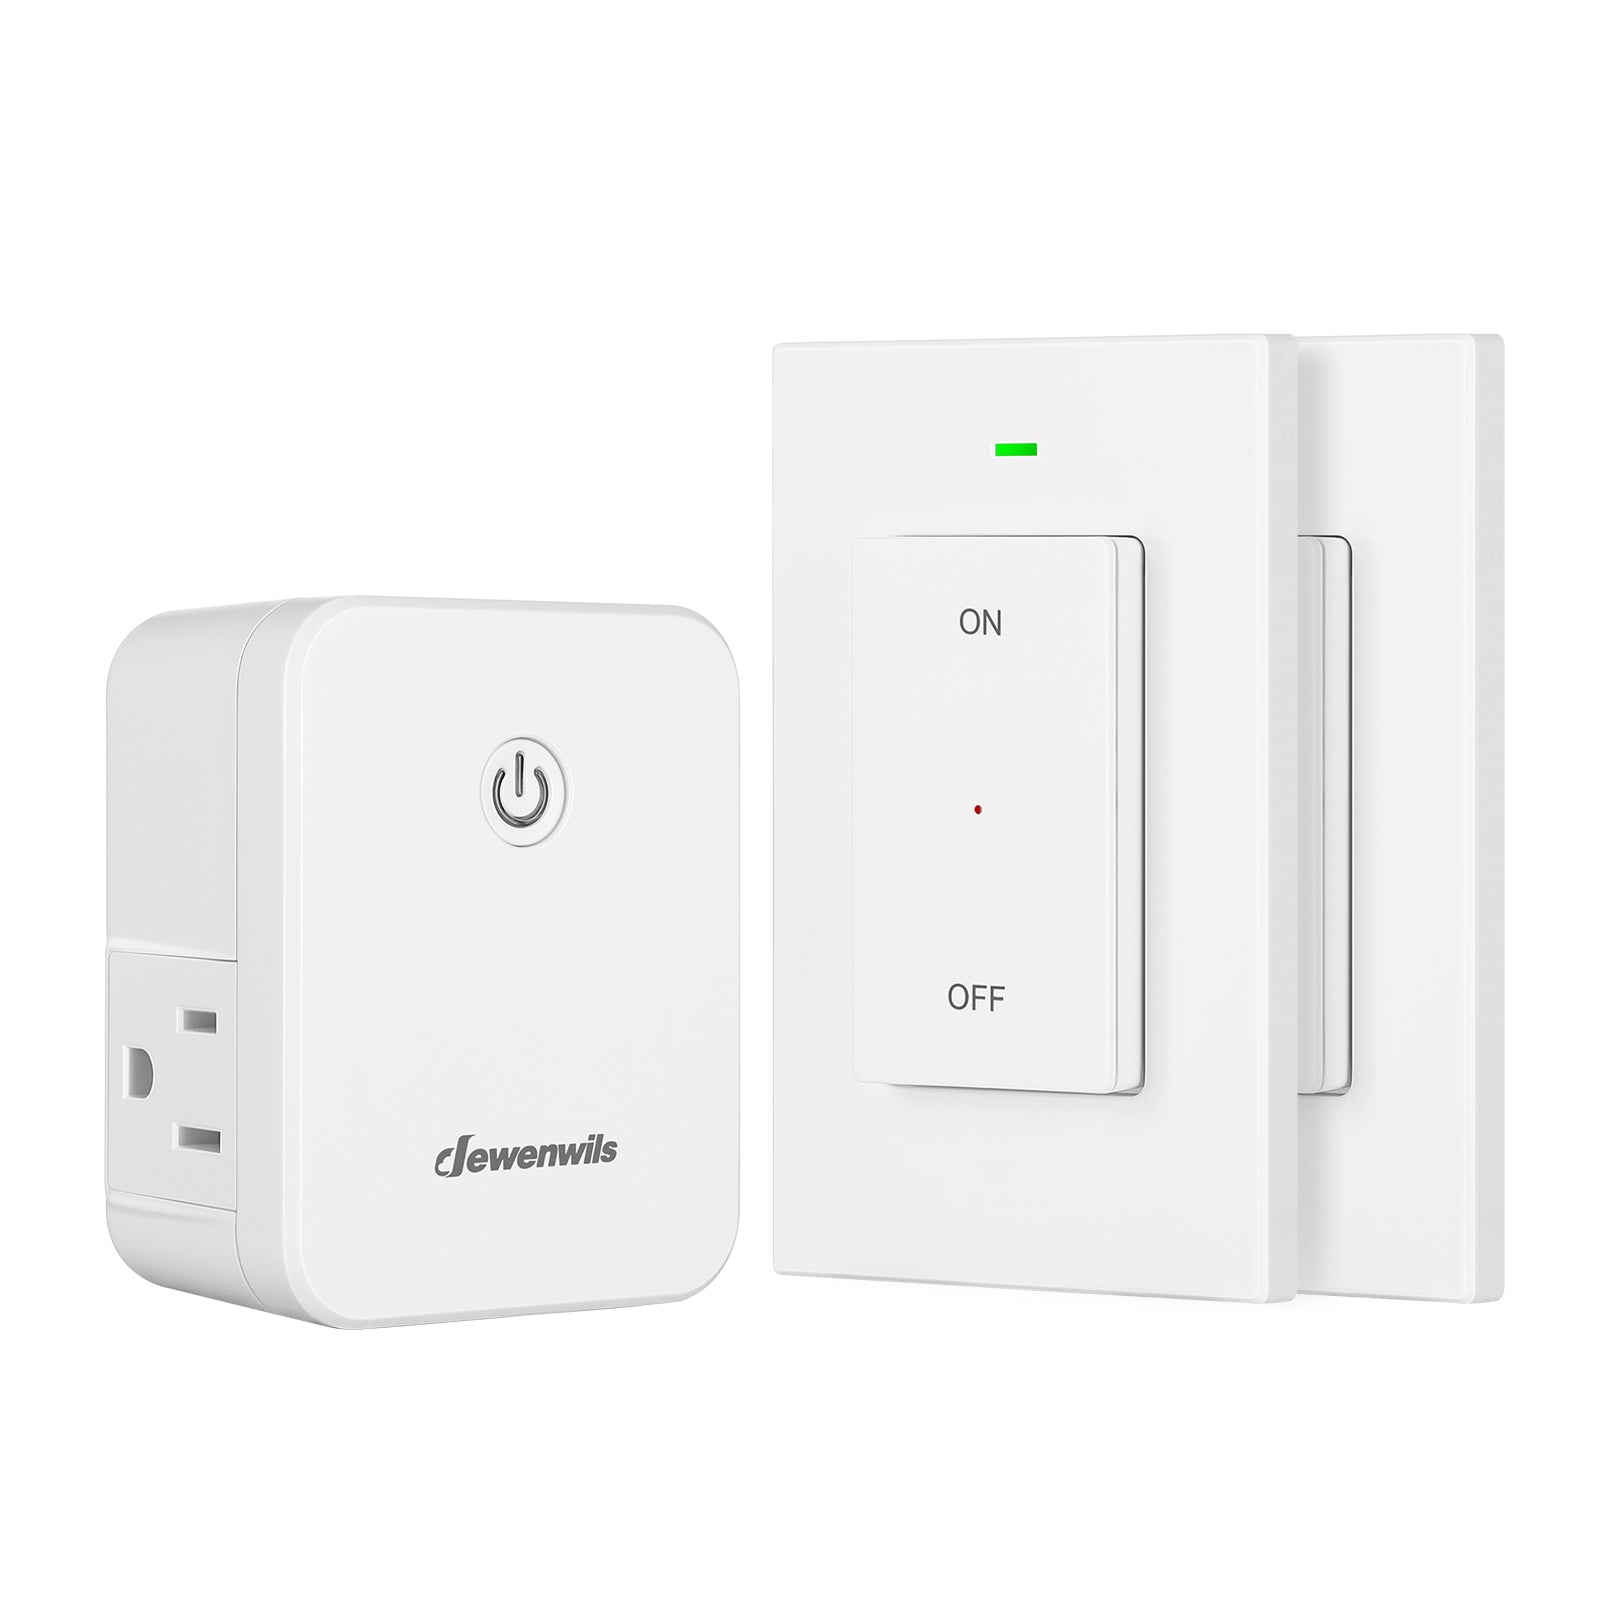 Dewenwils Wireless Light Switch Remote Control Outlet, Remote Power Wall  Switch for Lamps, No Wiring Needed